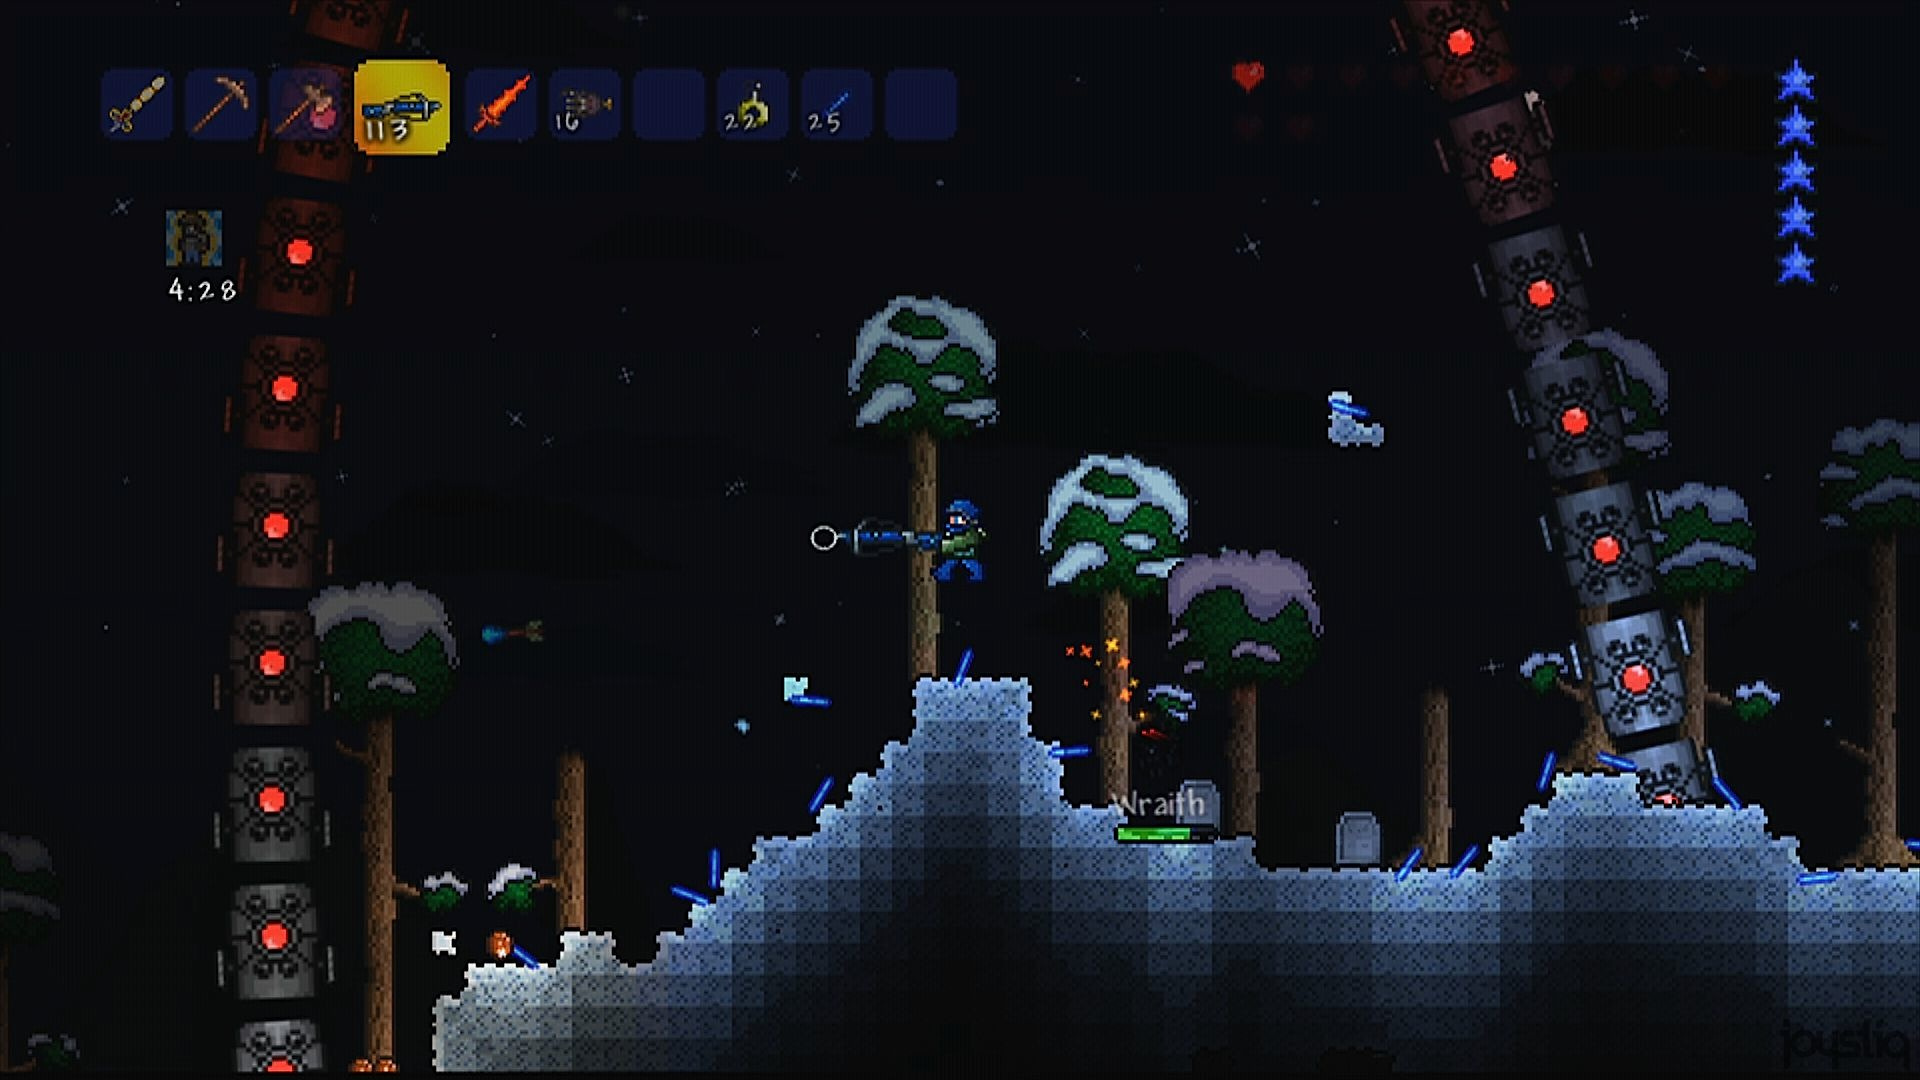 Terraria (PS3 / PlayStation 3) Game Profile | News, Reviews, Videos